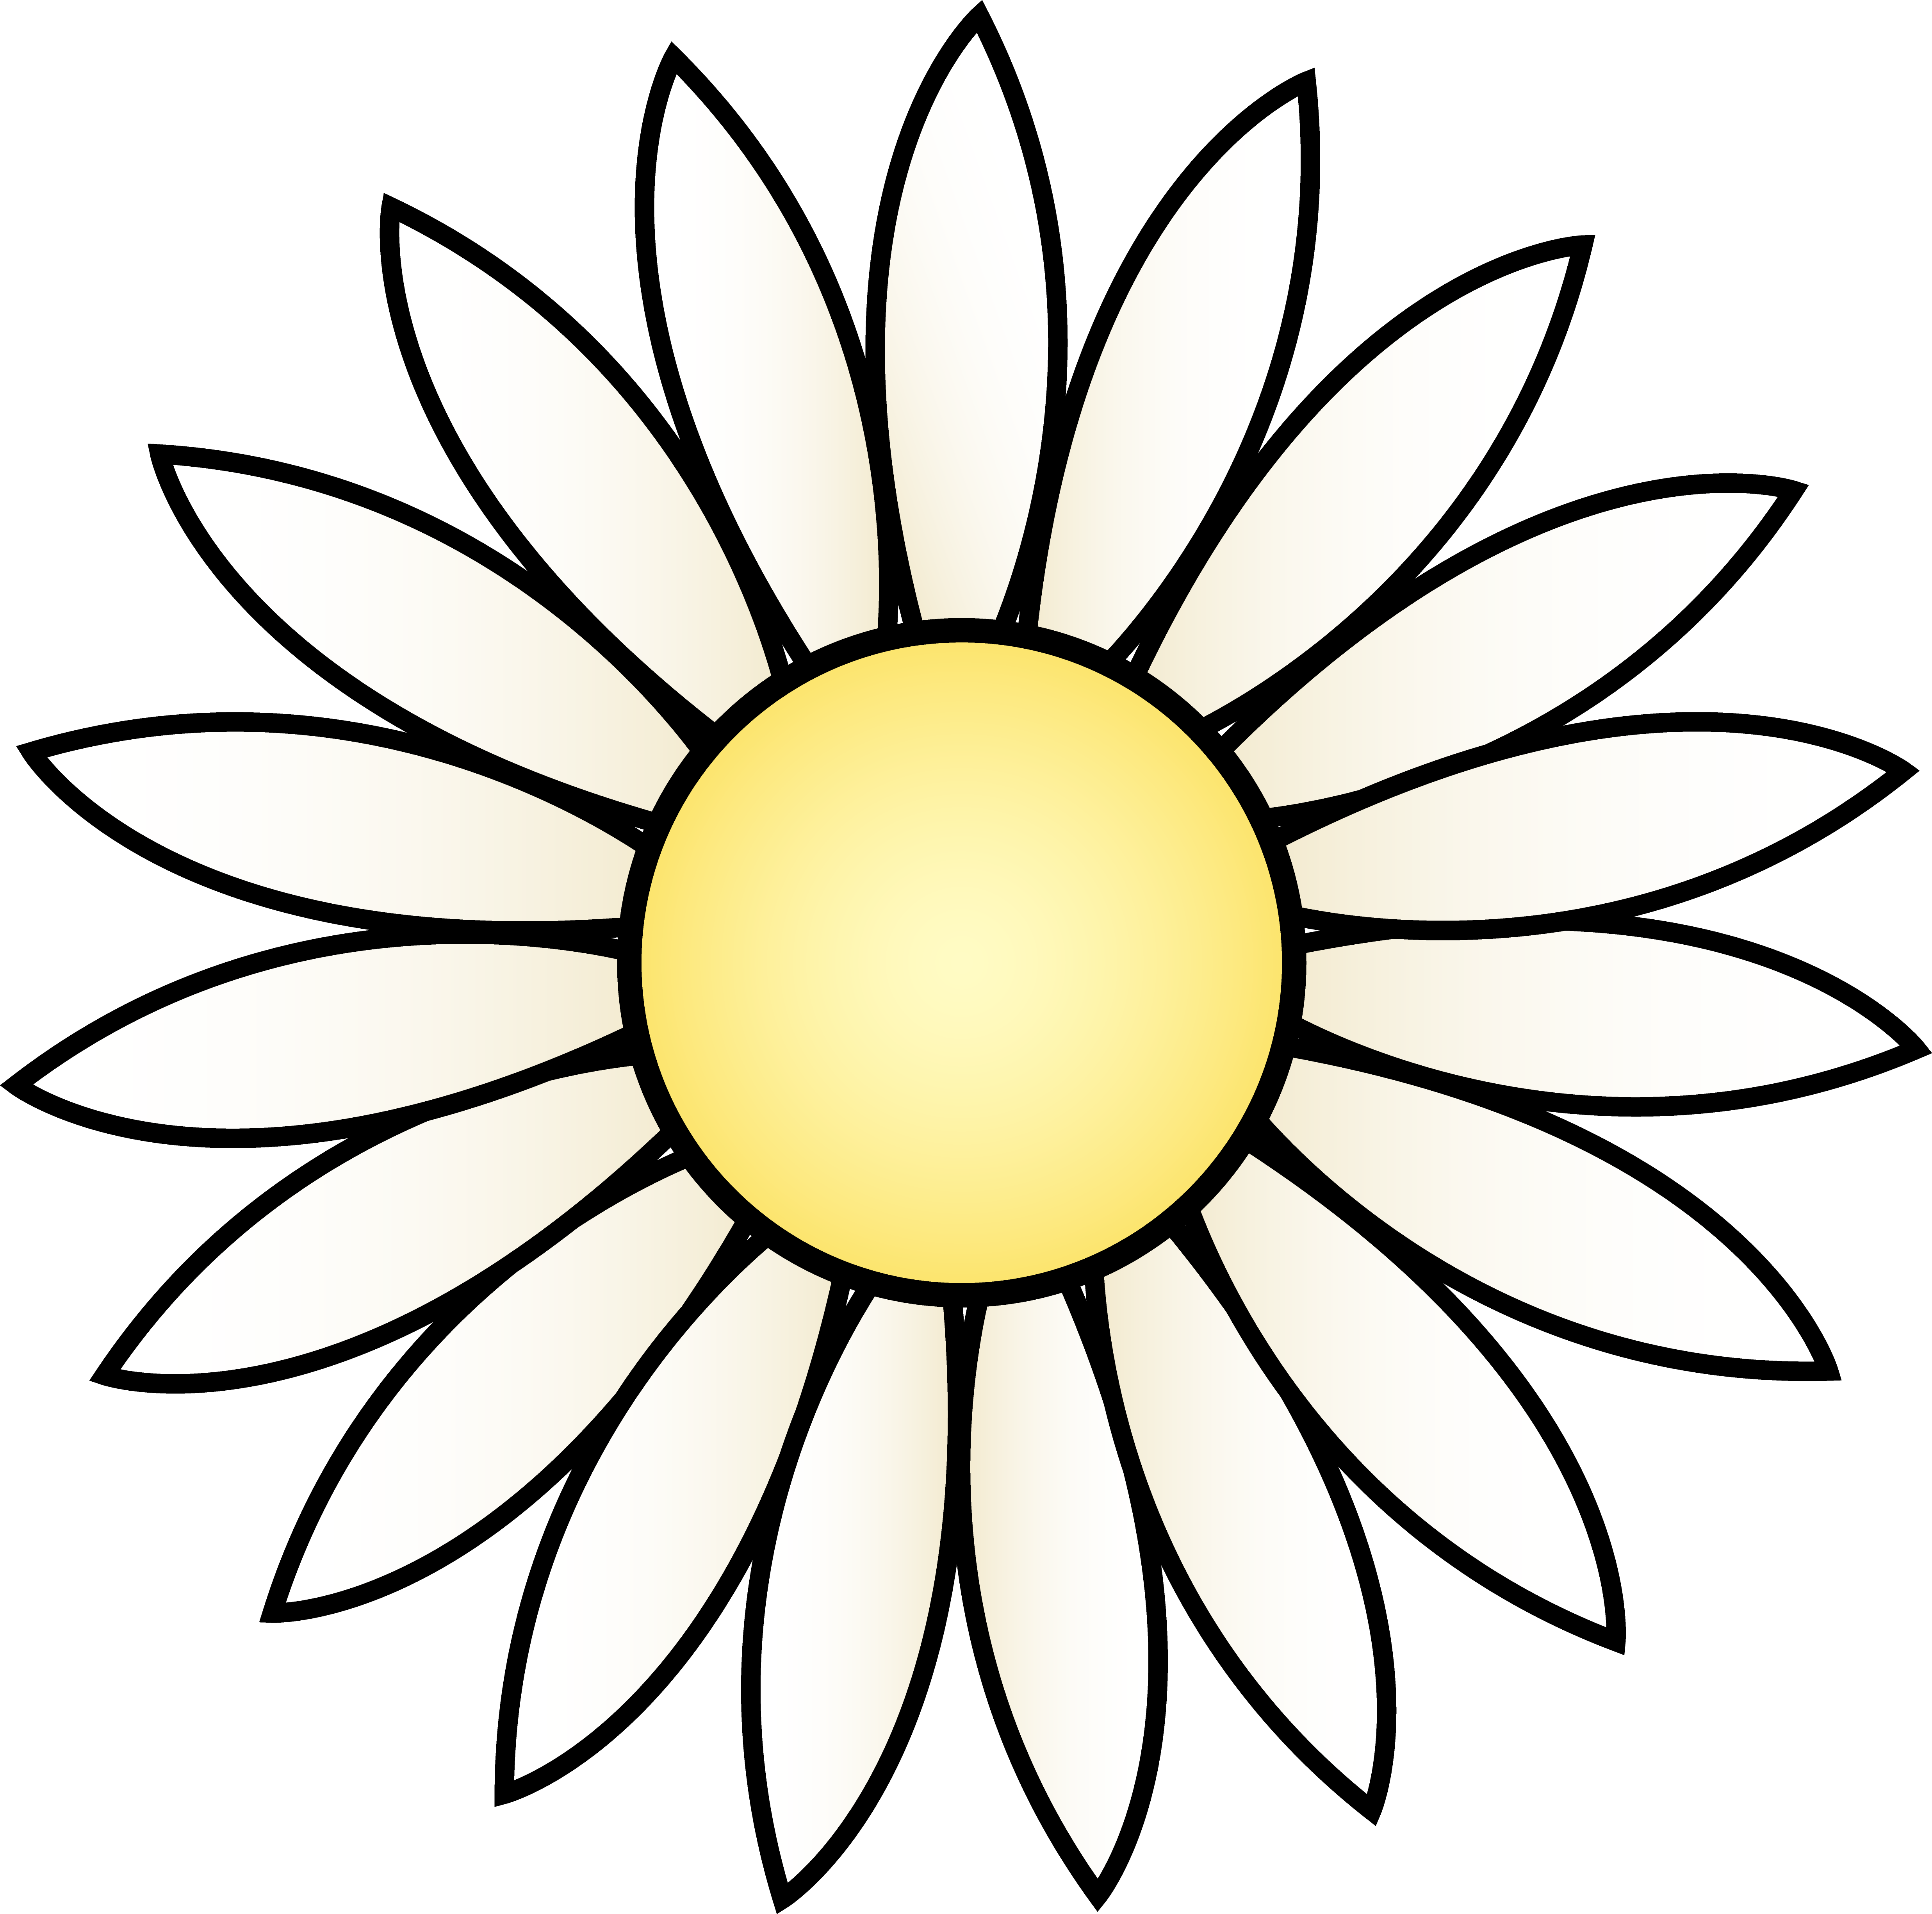 Black And White Daisy Clipart | Clipart Panda - Free Clipart Images